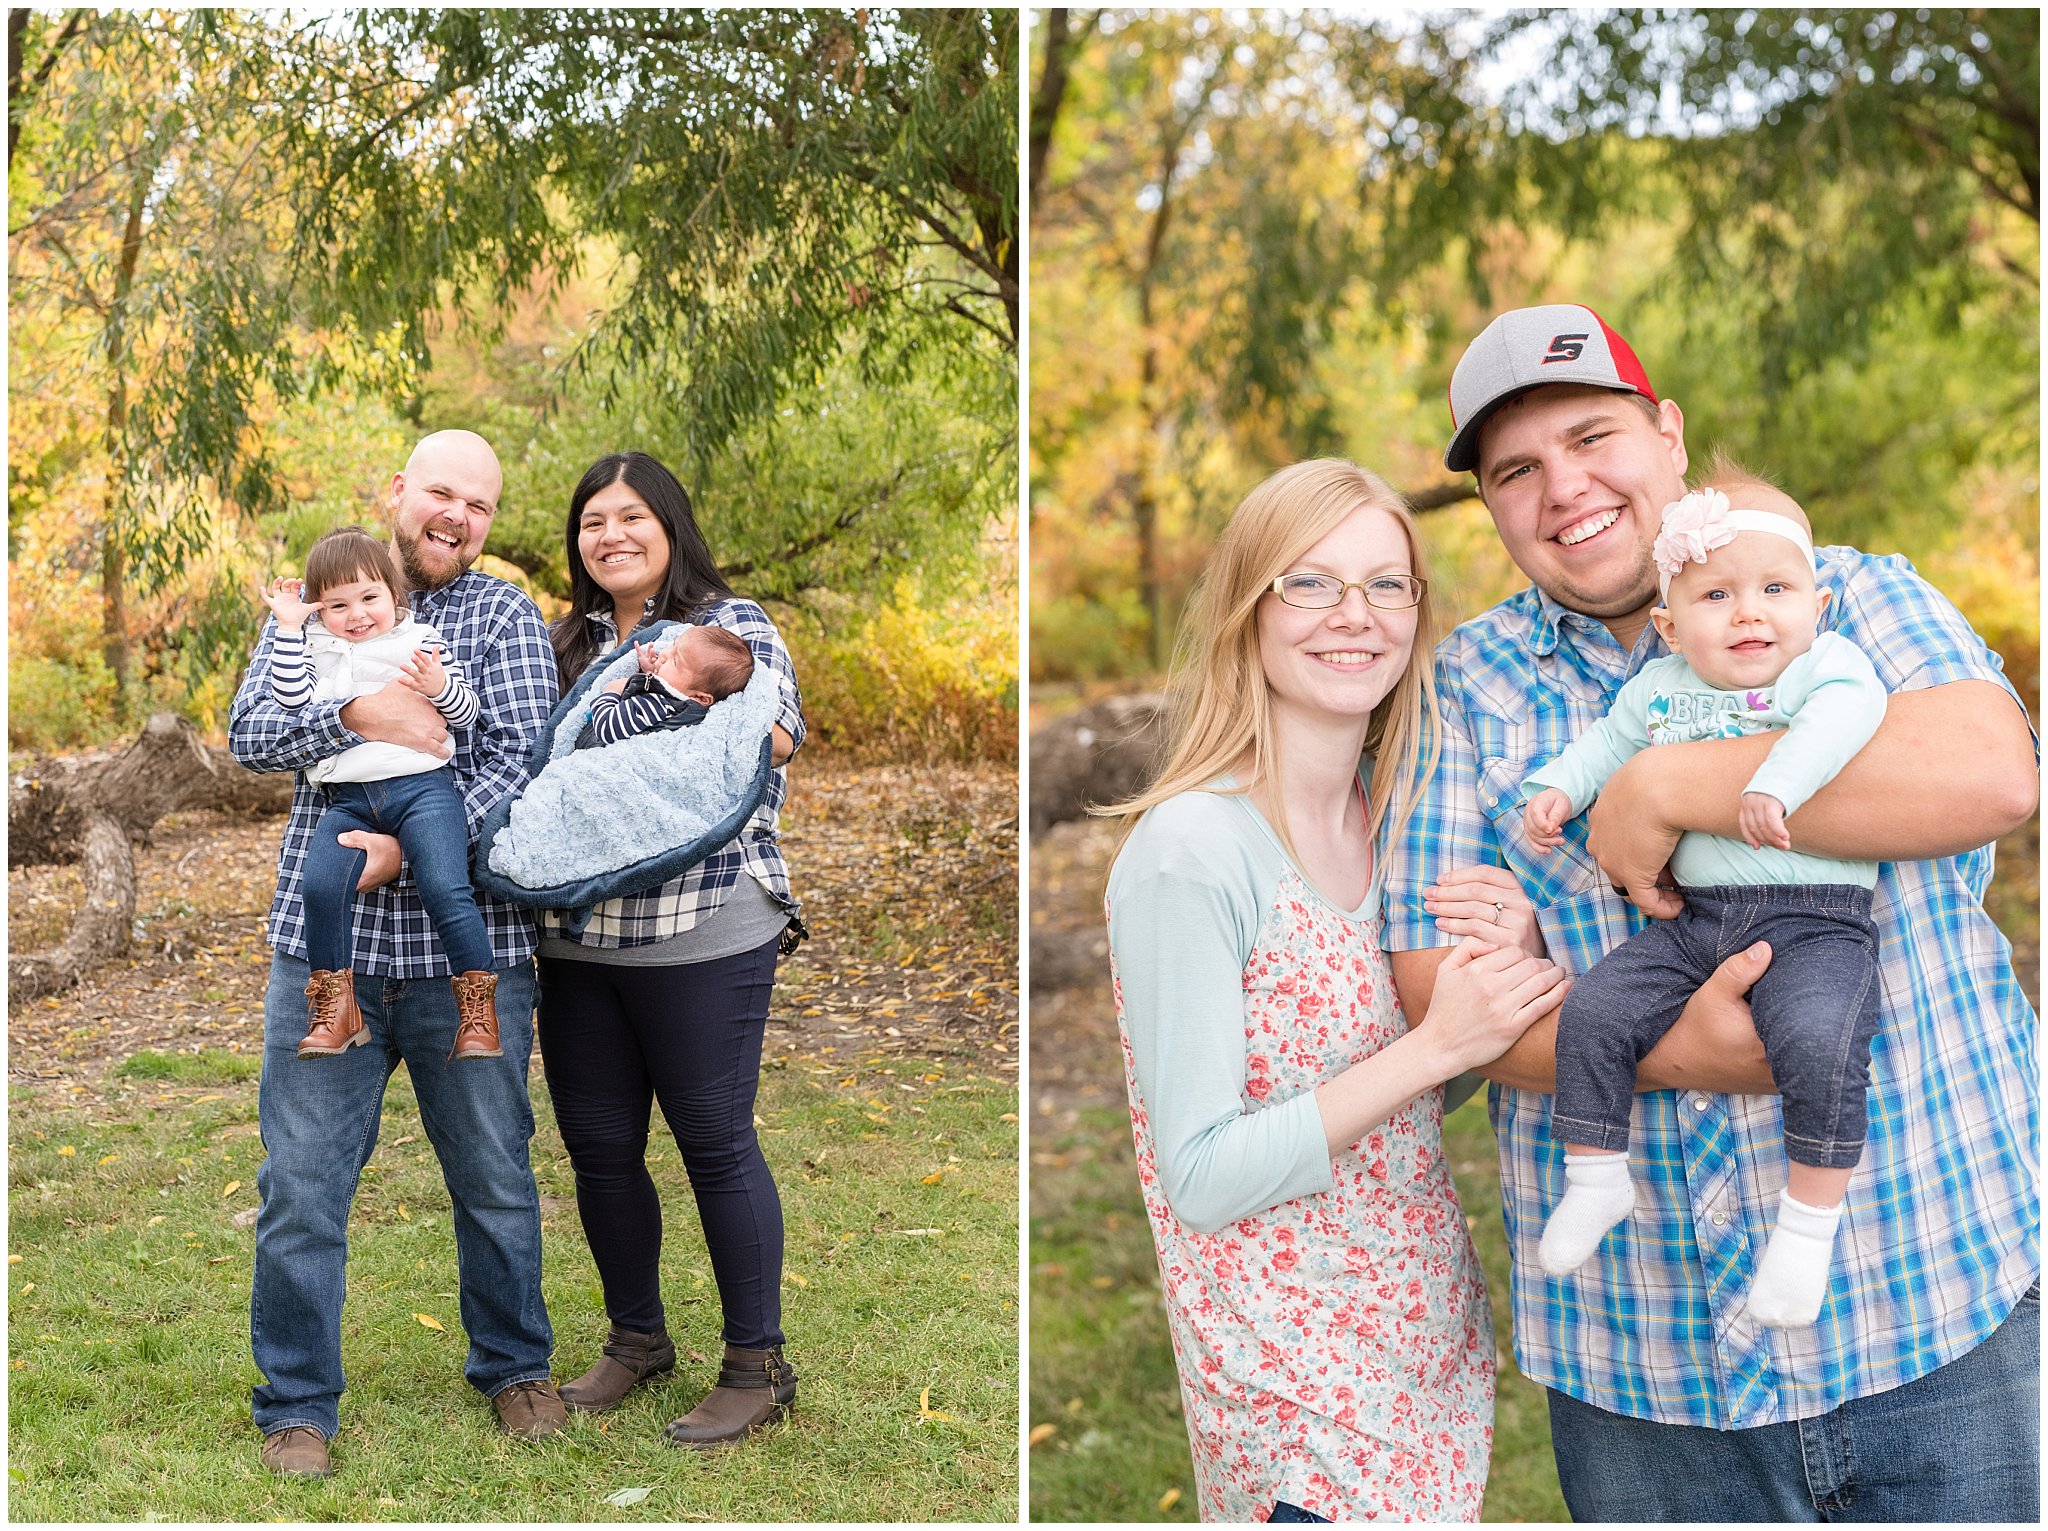 Families with their kids smiling at the camera | Tremonton Family Pictures and Make a Wish Event | Jessie and Dallin Photography